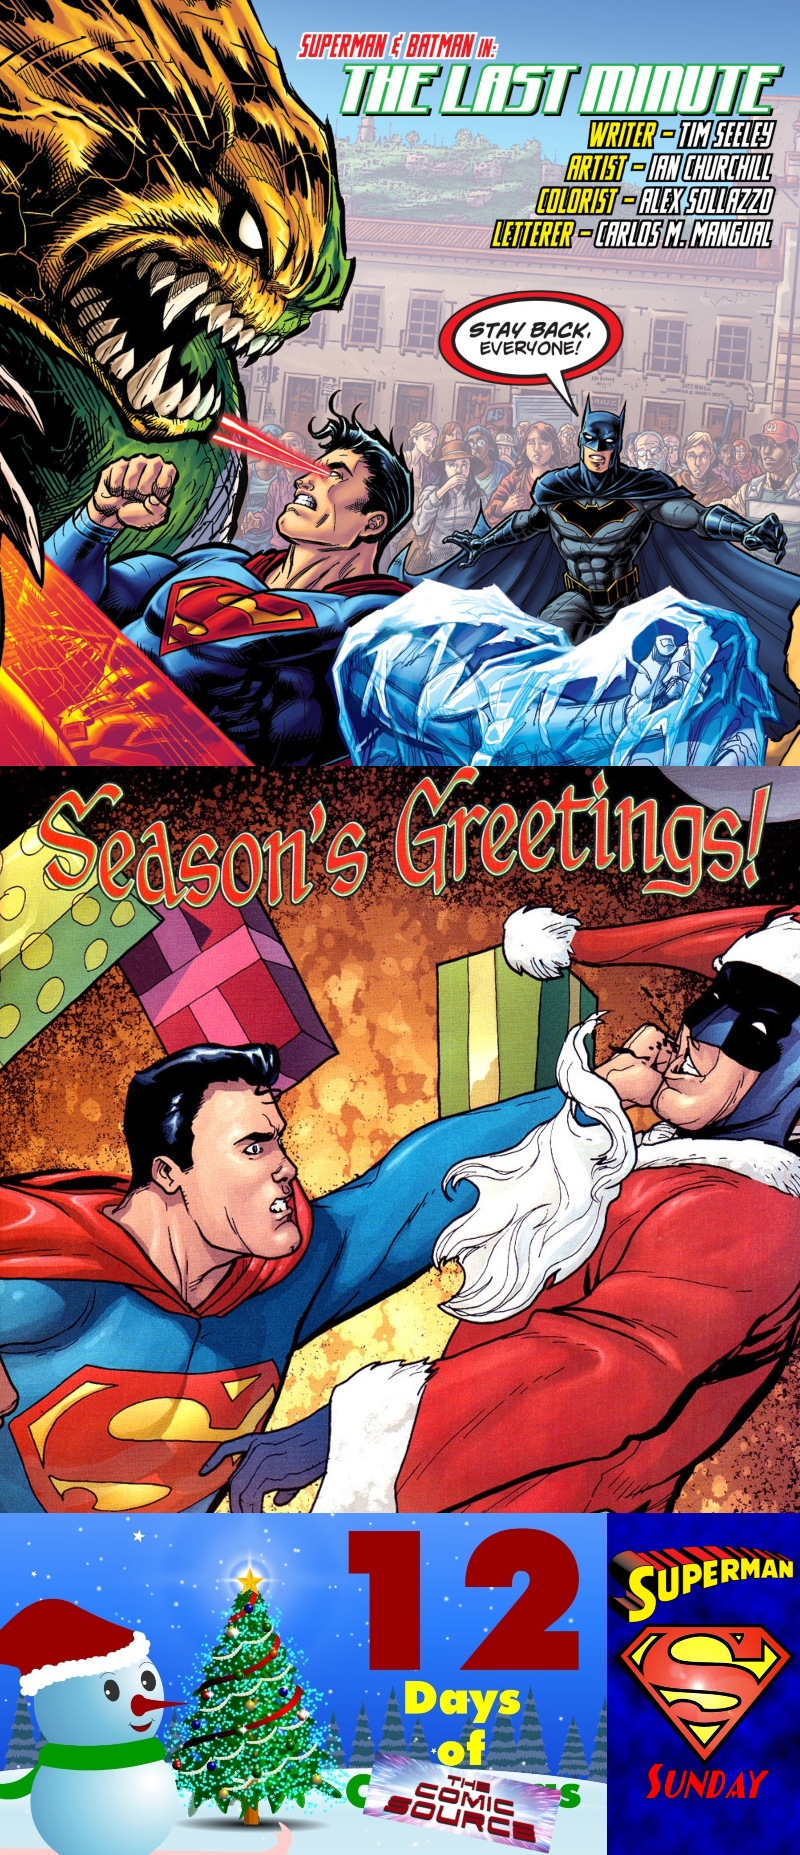 Superman/Batman Holiday Stories | Superman Sunday – 12 Days of The Comic Source: The Comic Source Podcast